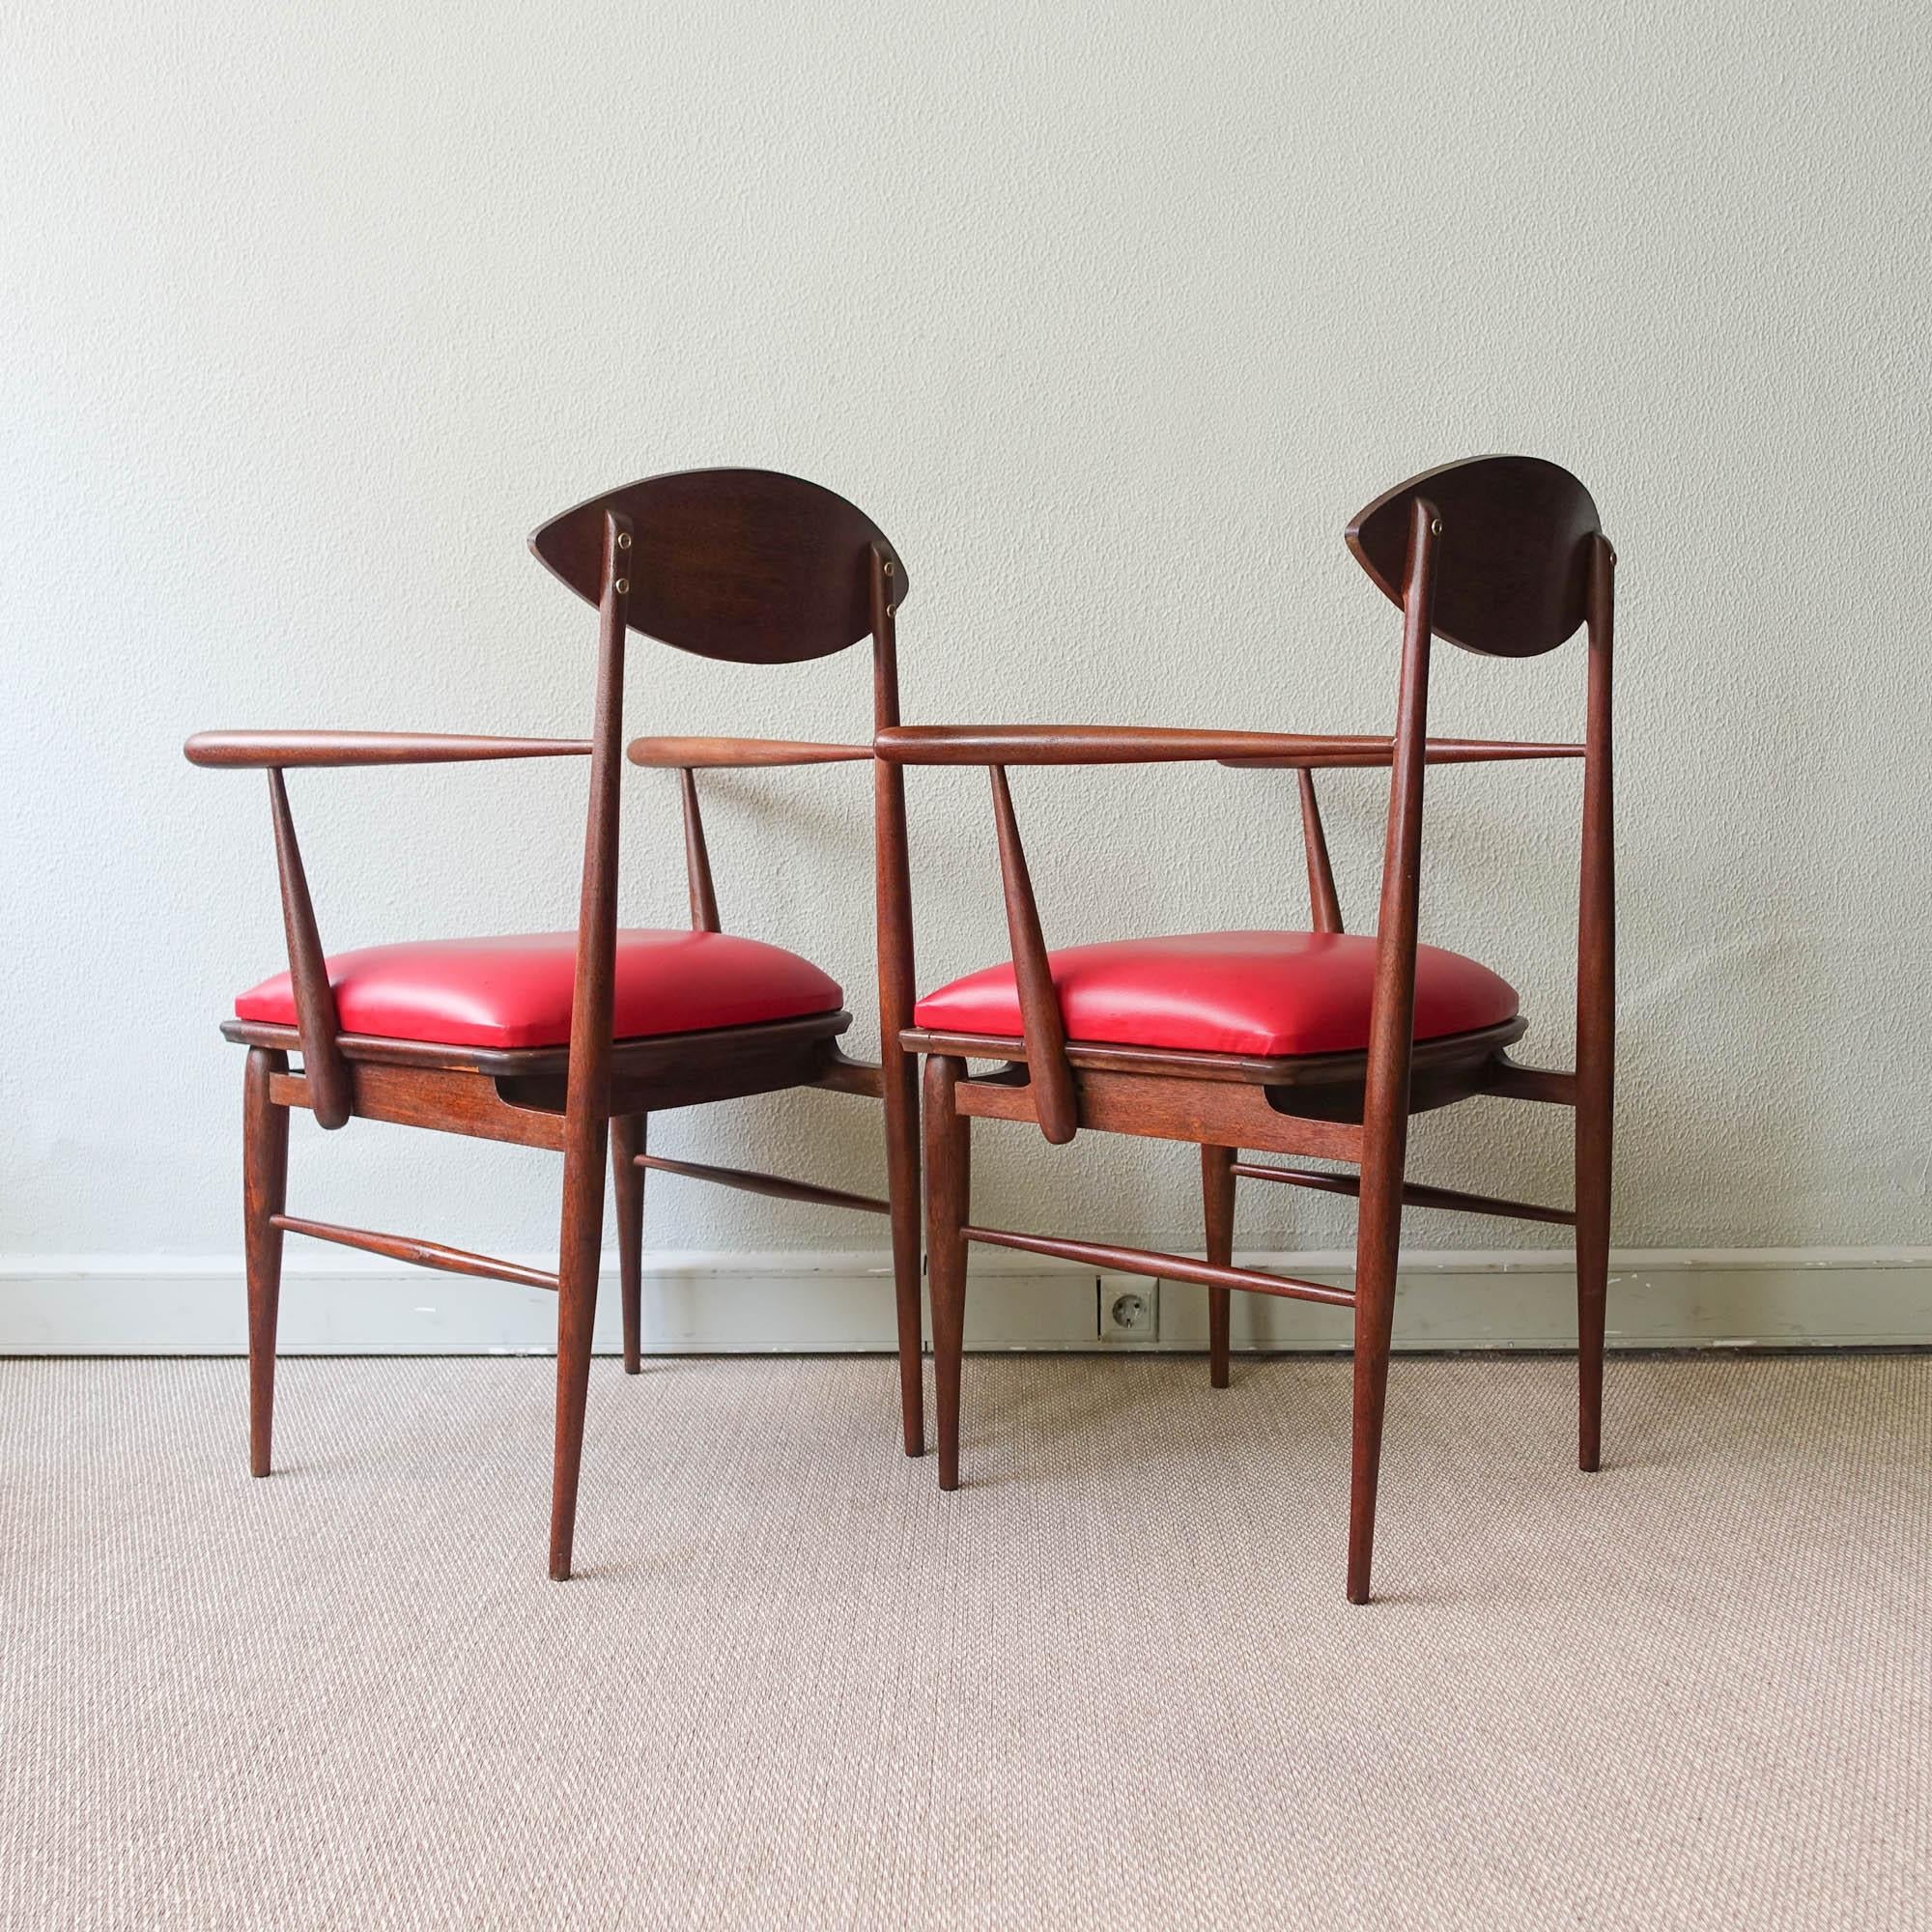 Mid-20th Century Armchair in Sucupira Wood, 1960's For Sale